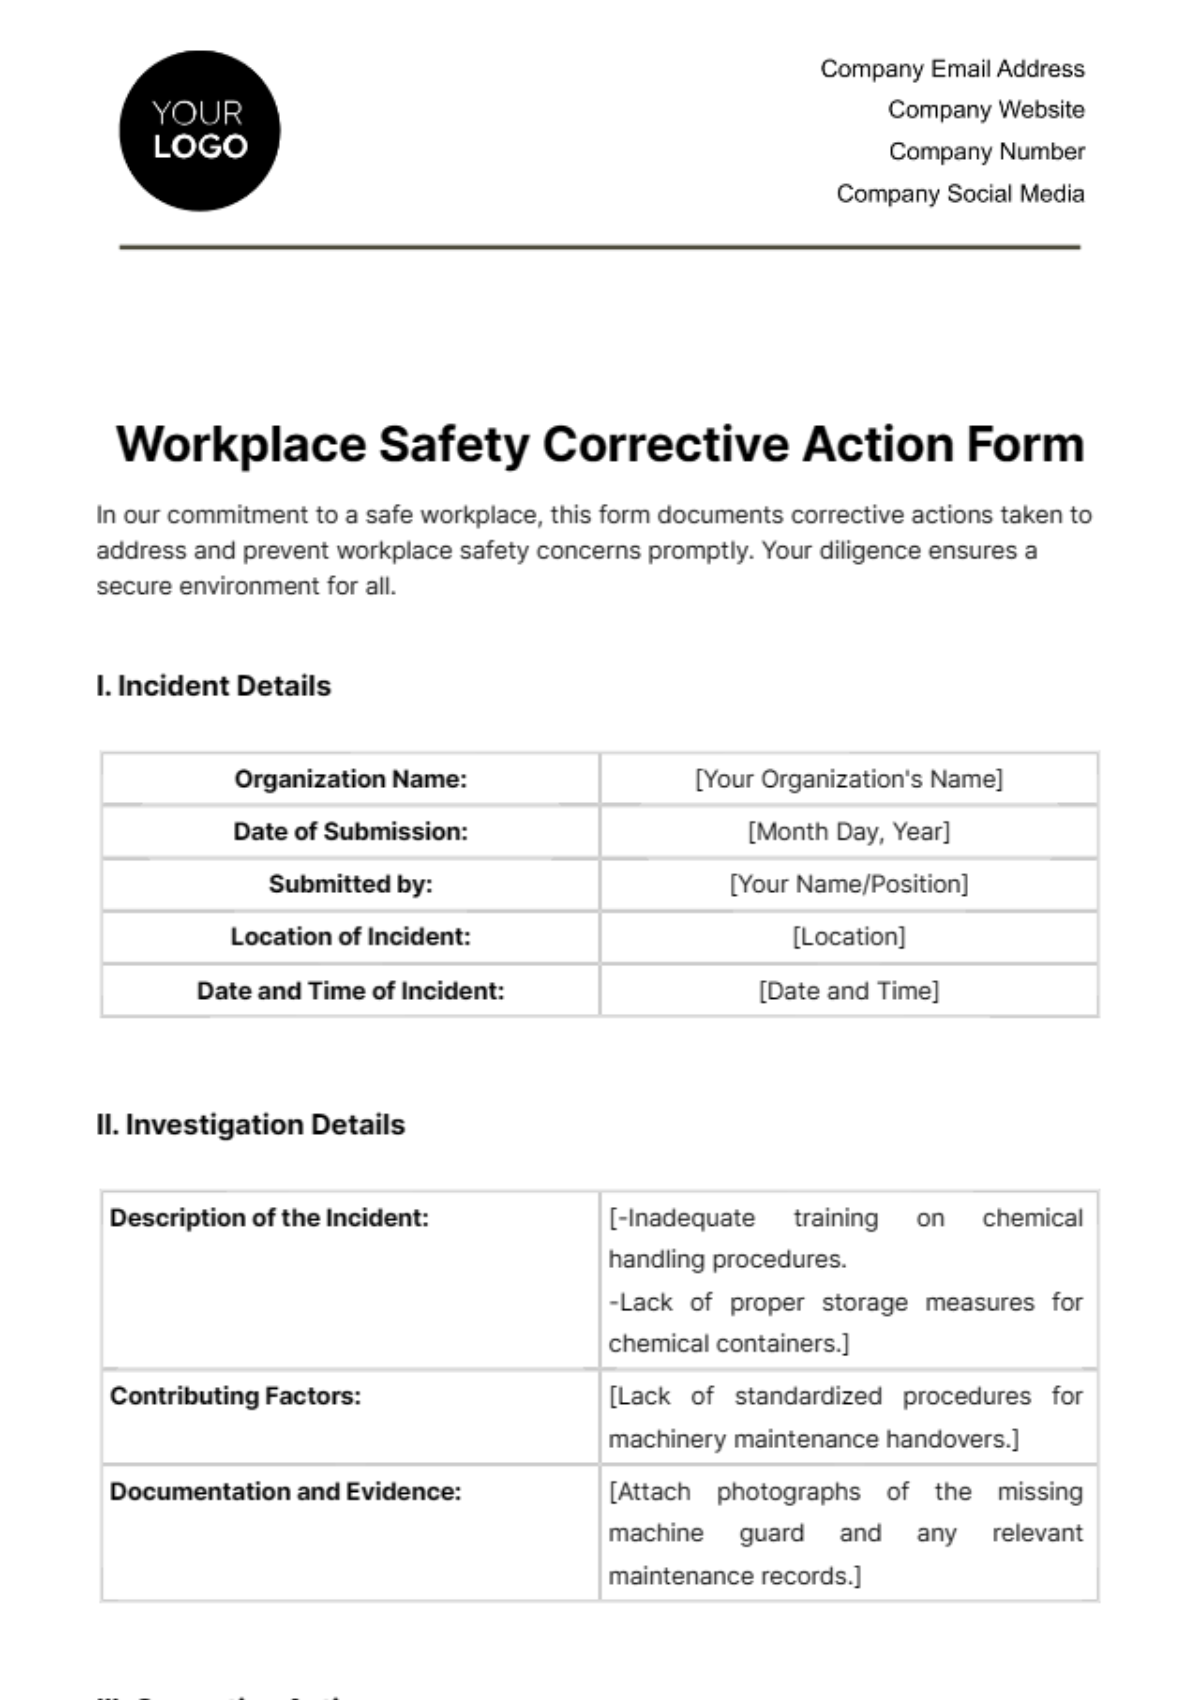 Free Workplace Safety Corrective Action Form Template